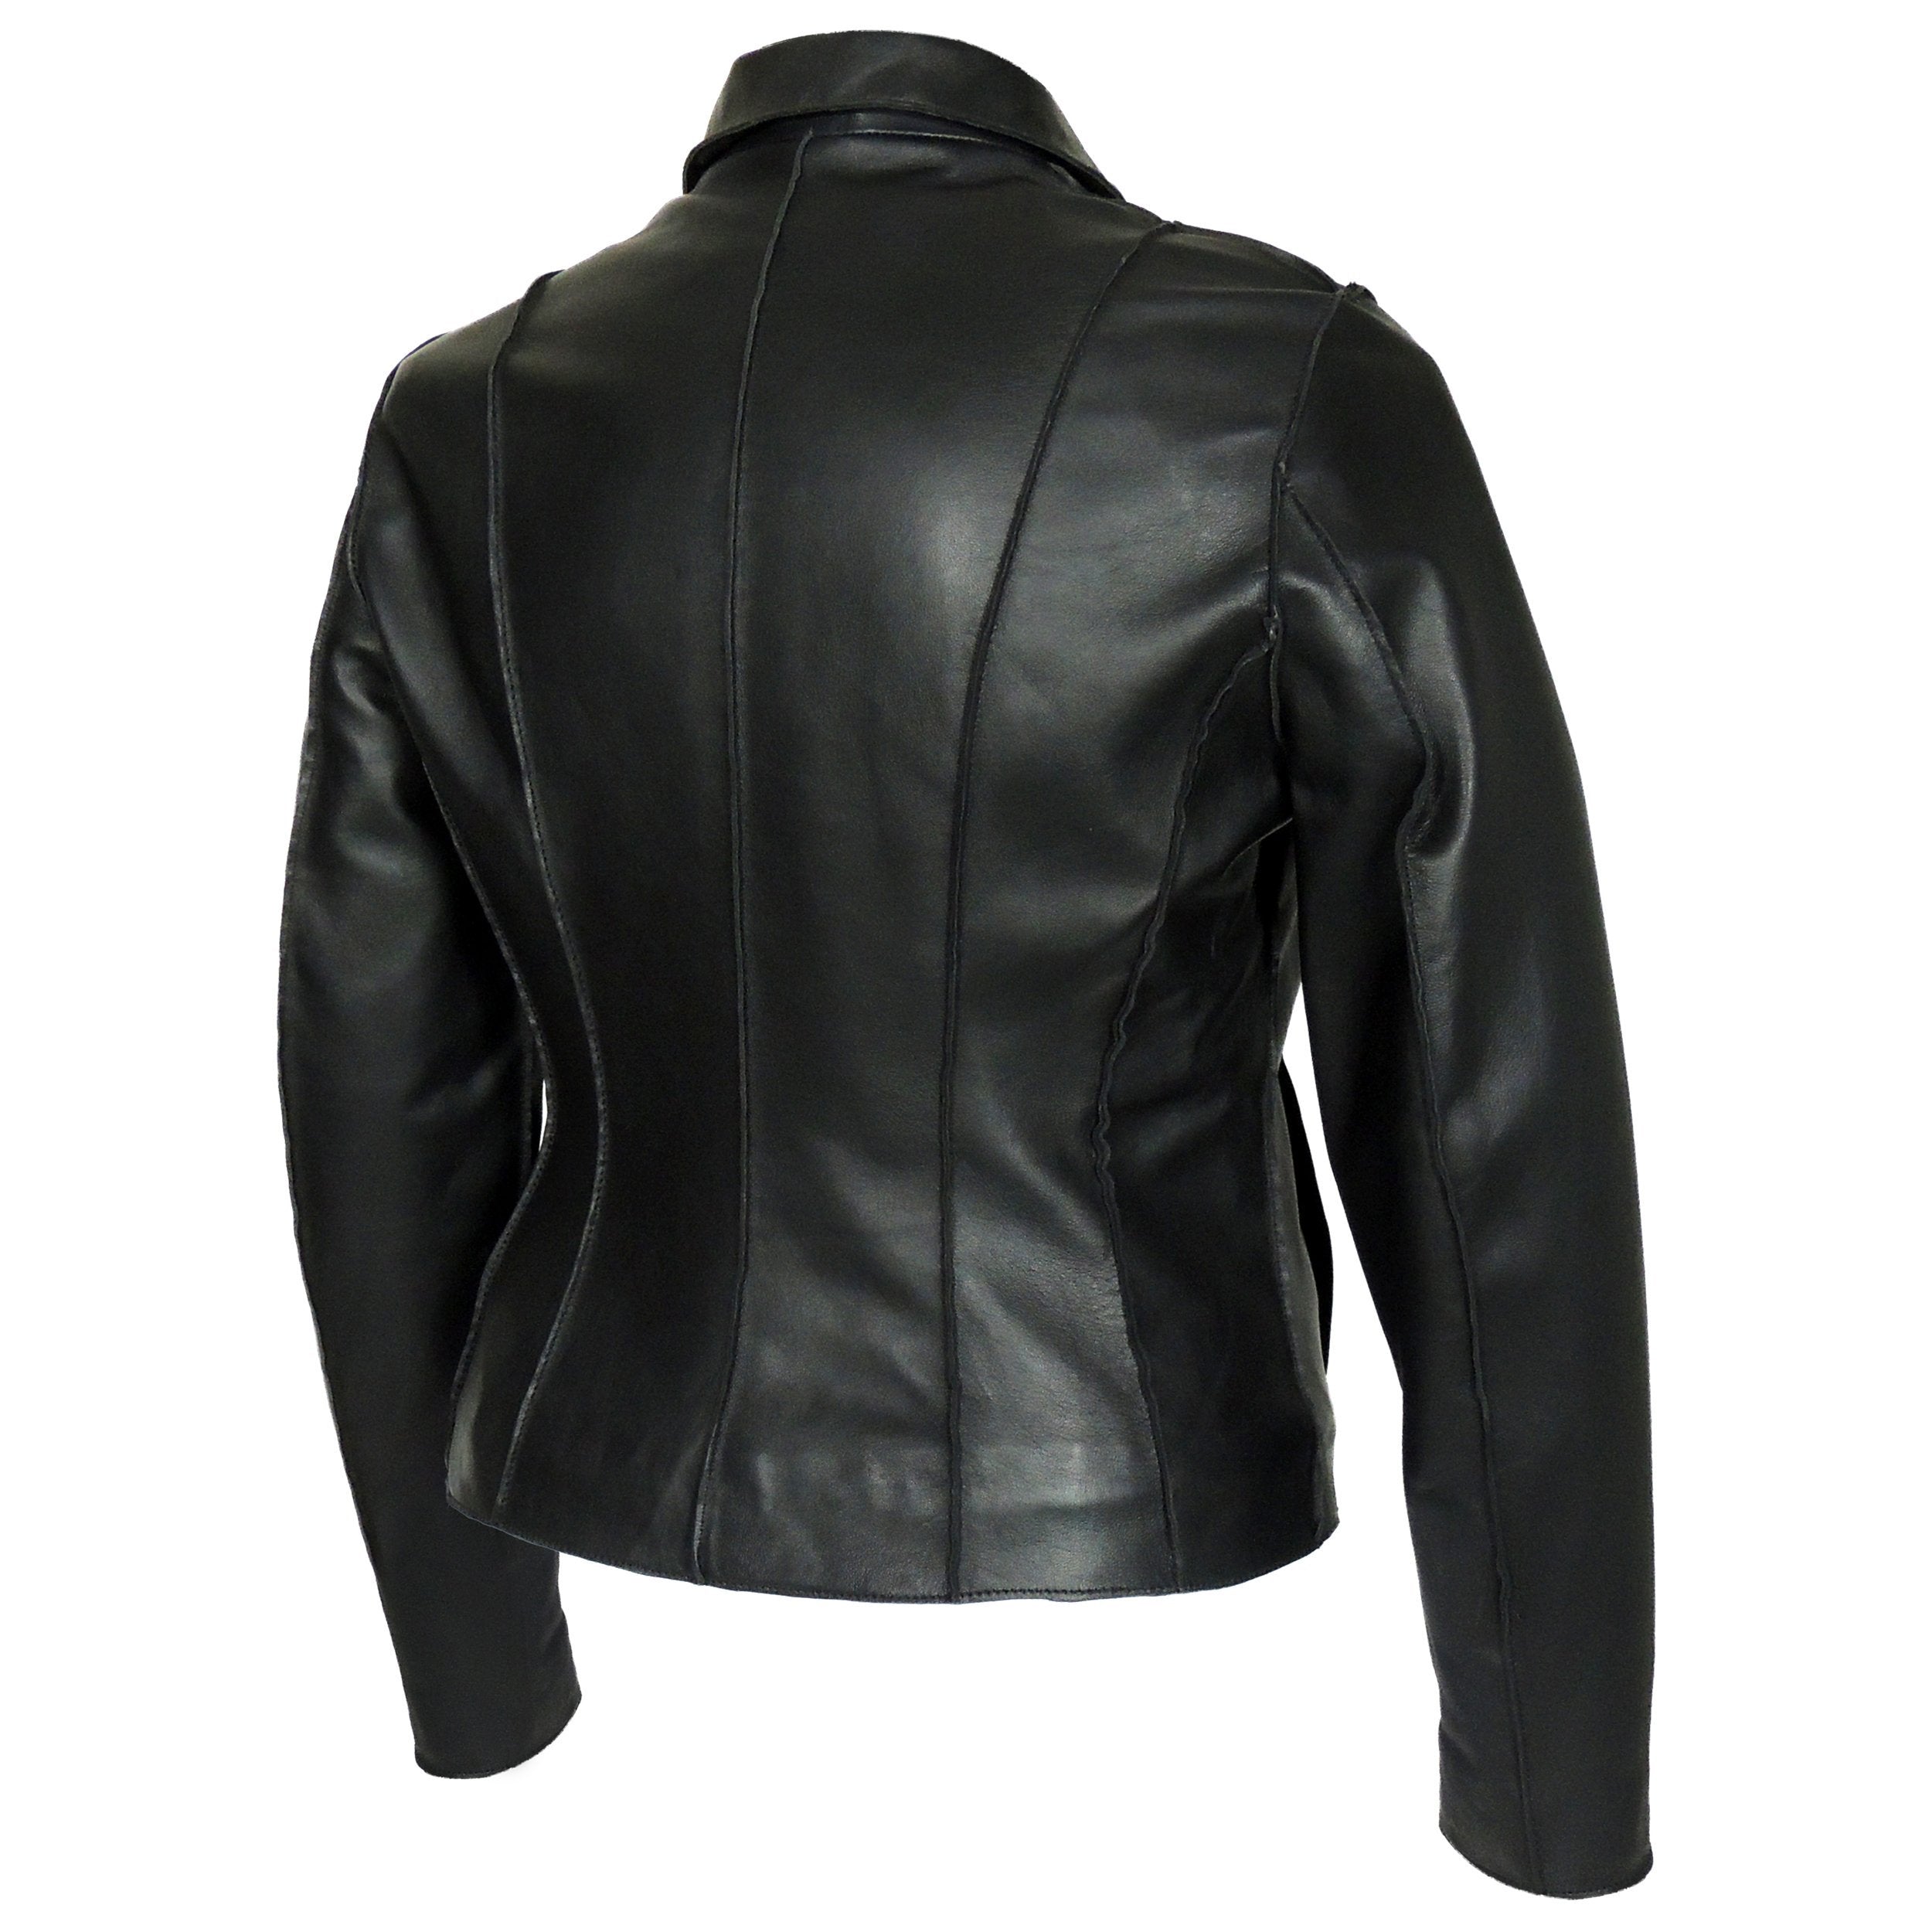 Picture of a Picture of a Women's Professional Stunner Sheepskin Leather Jacket black back view